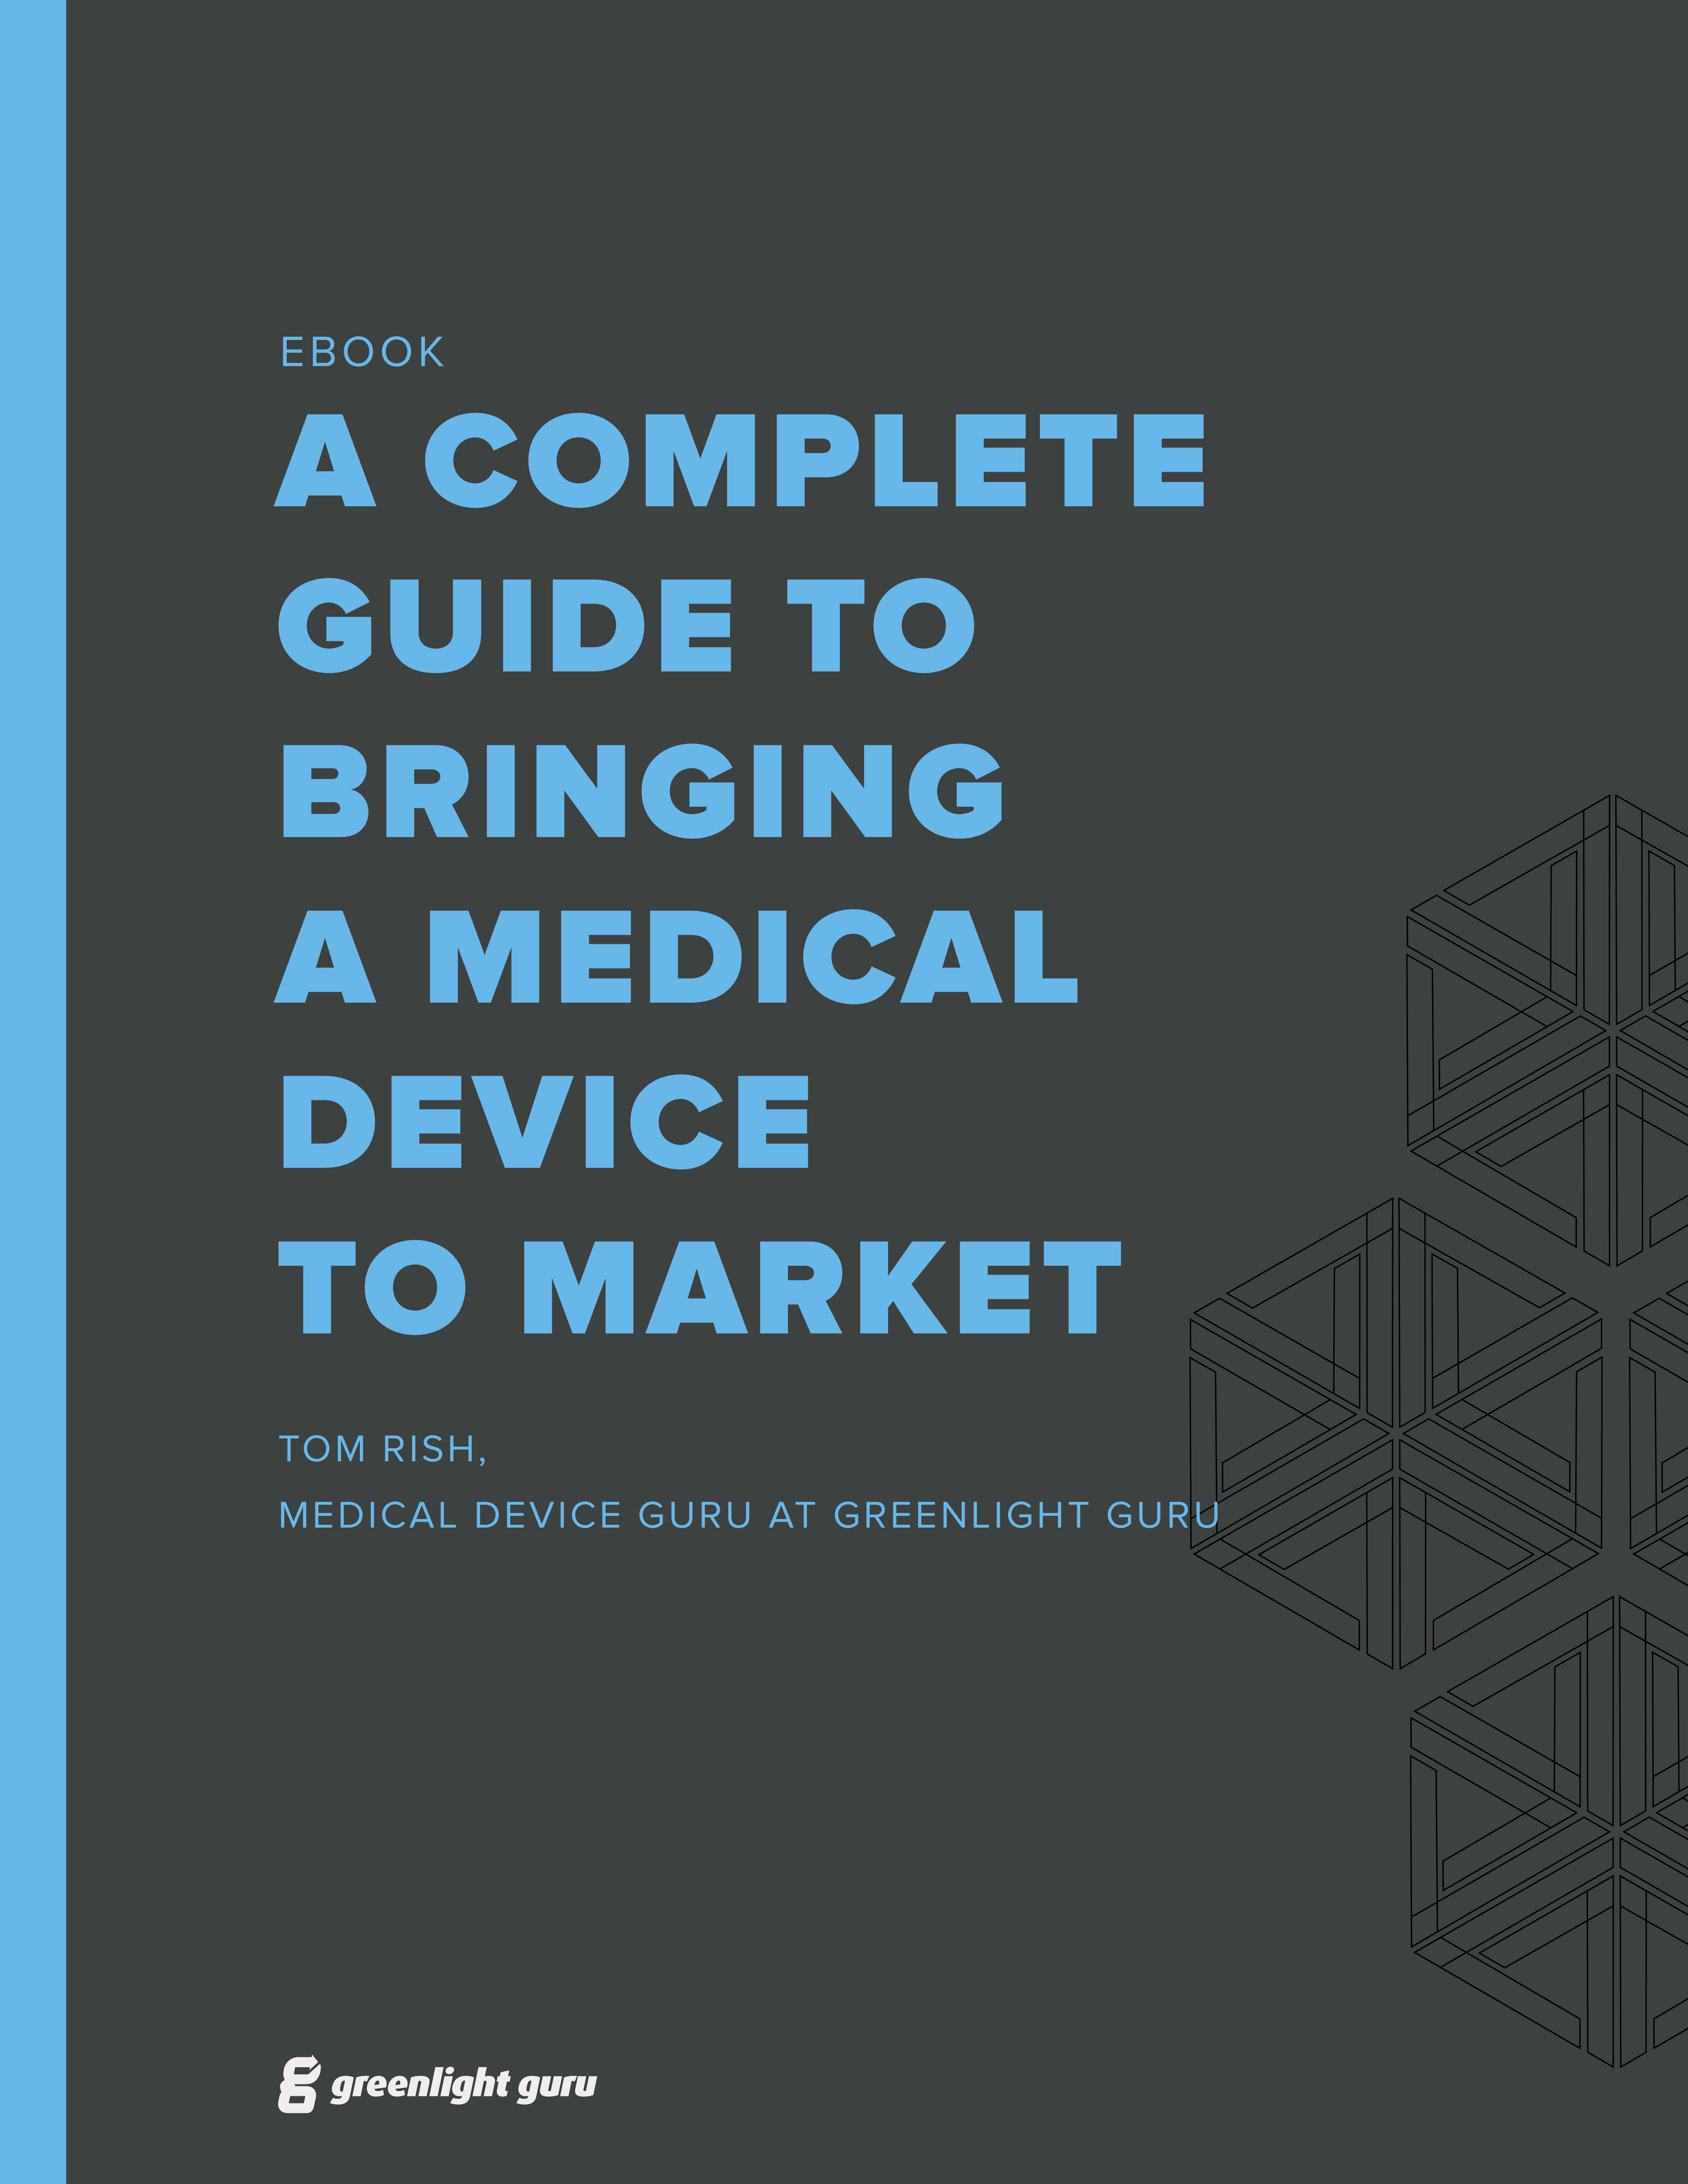 (cover) A Complete Guide to Bringing a Medical Device to Market